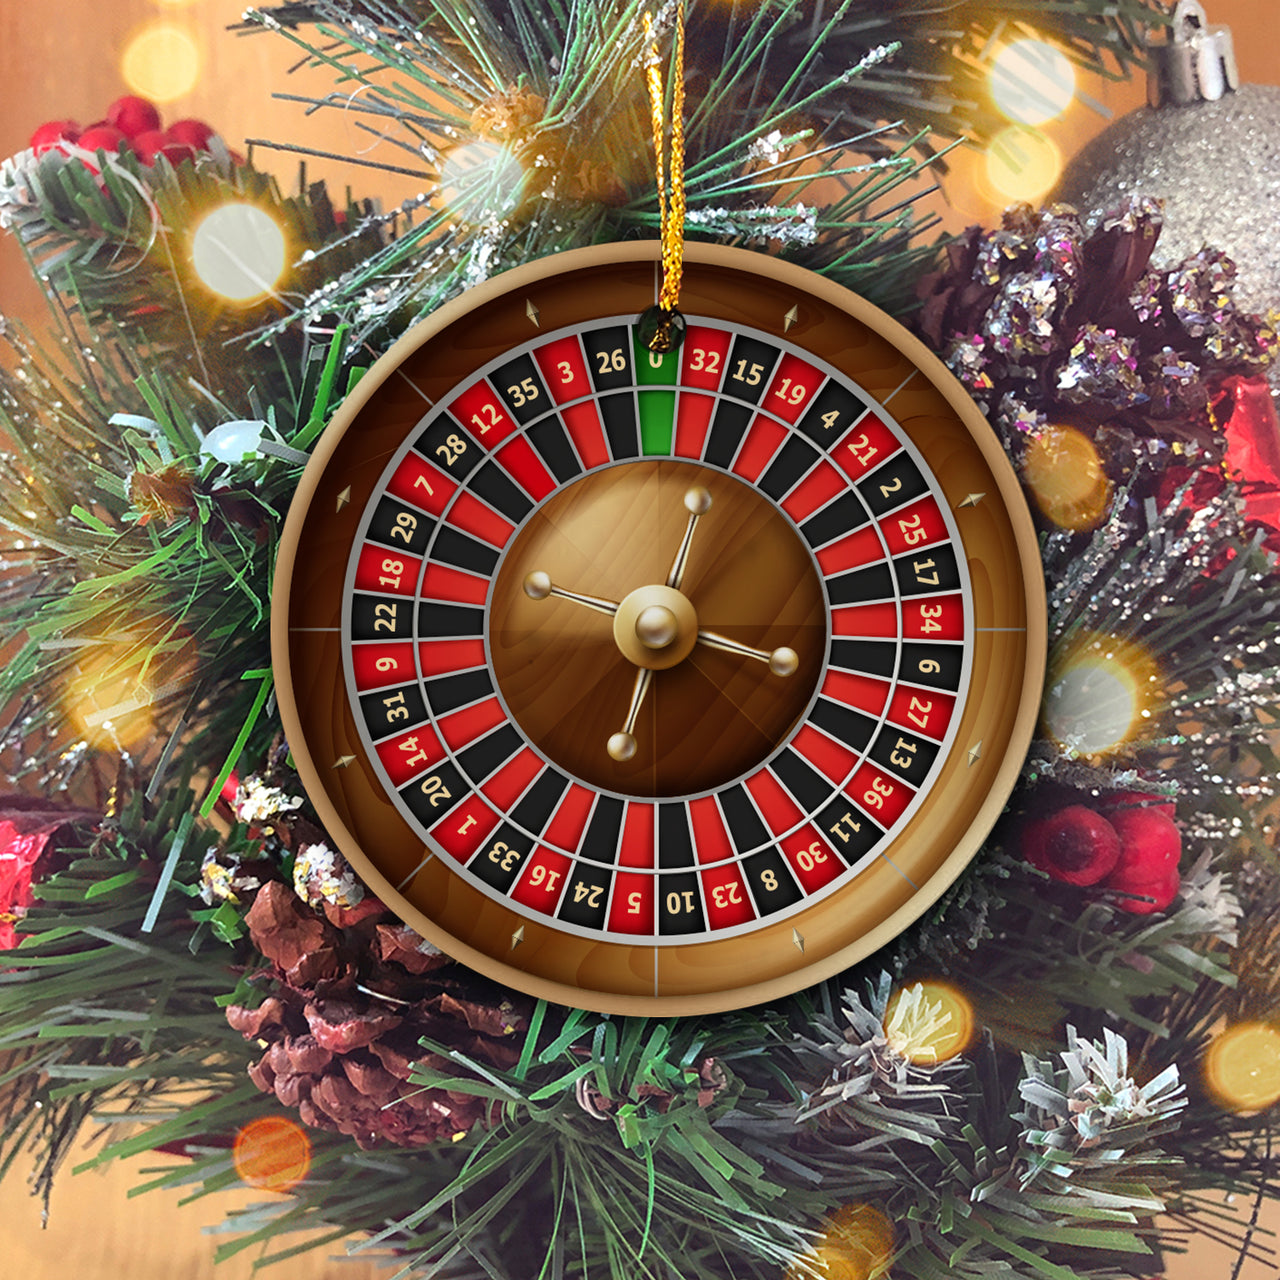 Funny Casino Roulette Table Personalized Christmas Premium Ceramic Ornaments Sets for Christmas Tree